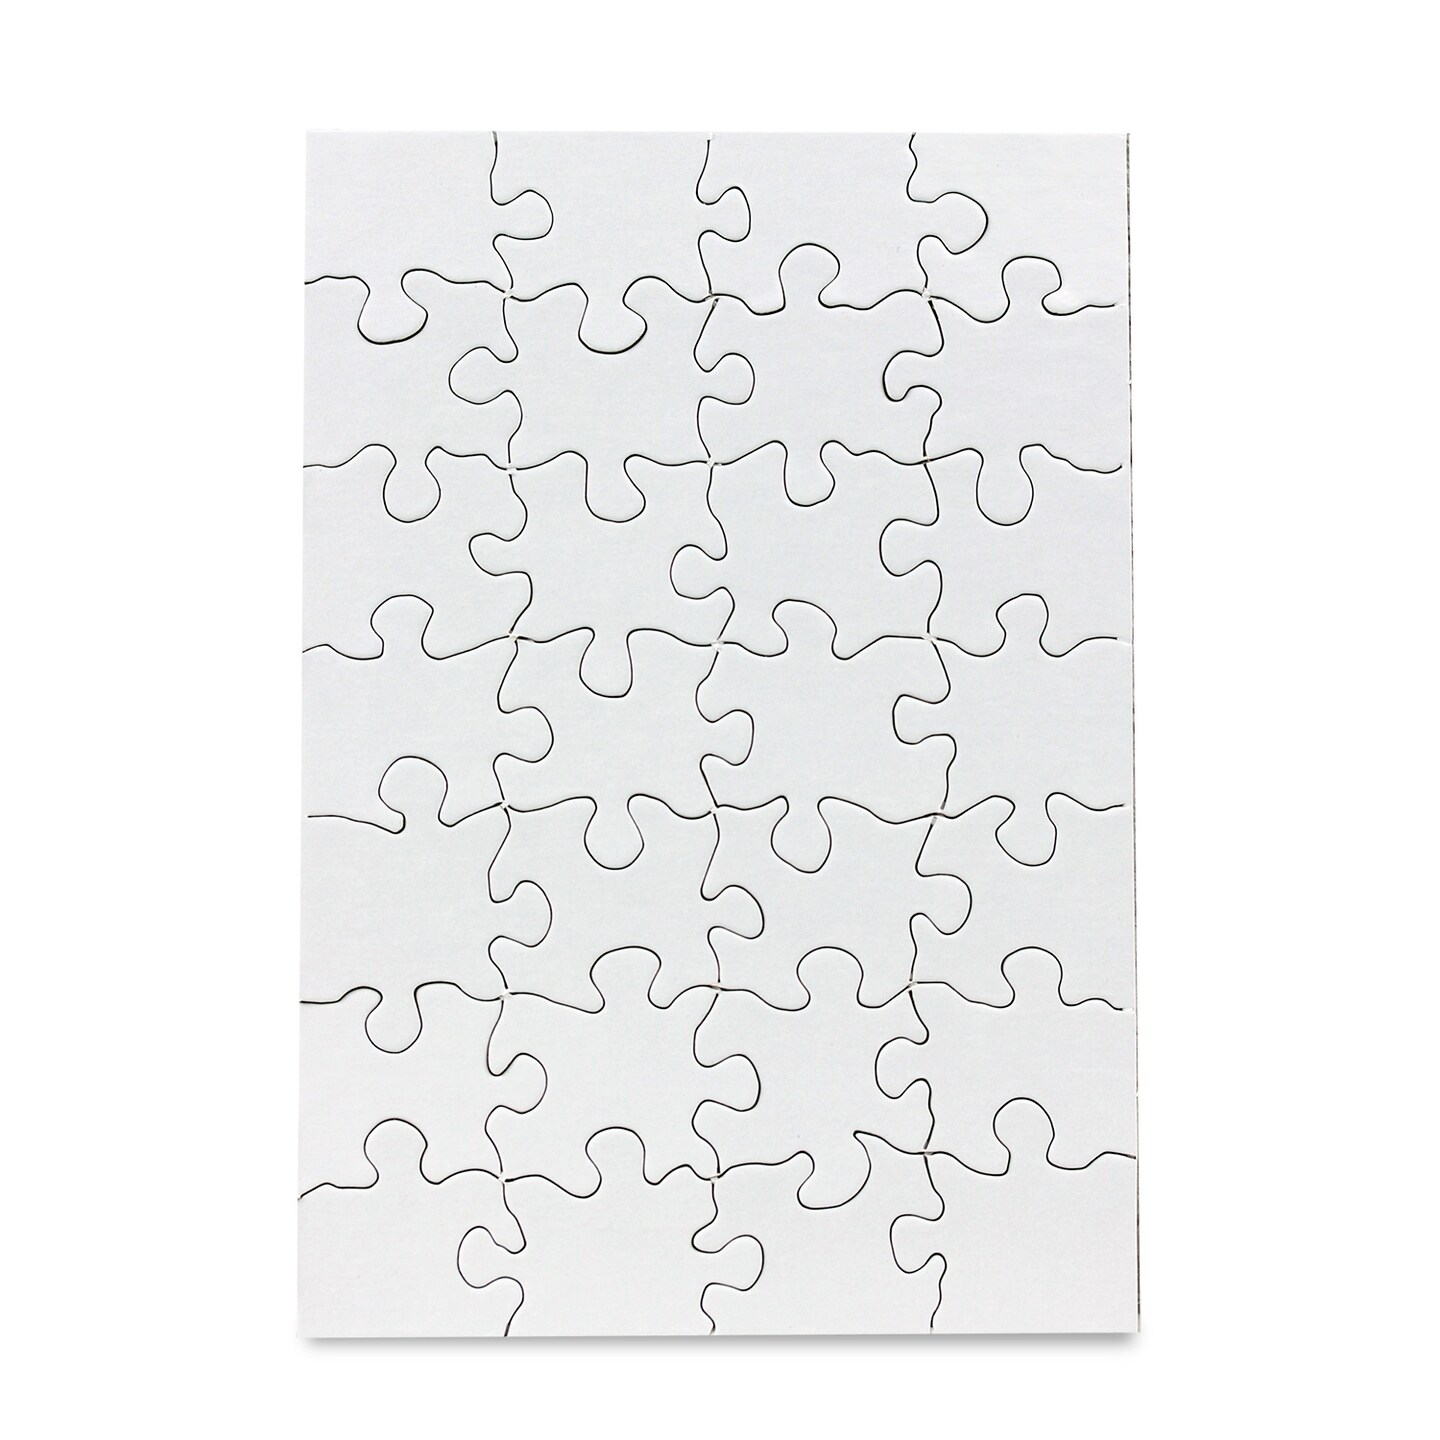 Blank Jigsaw Puzzles, Compoz-A-Puzzle